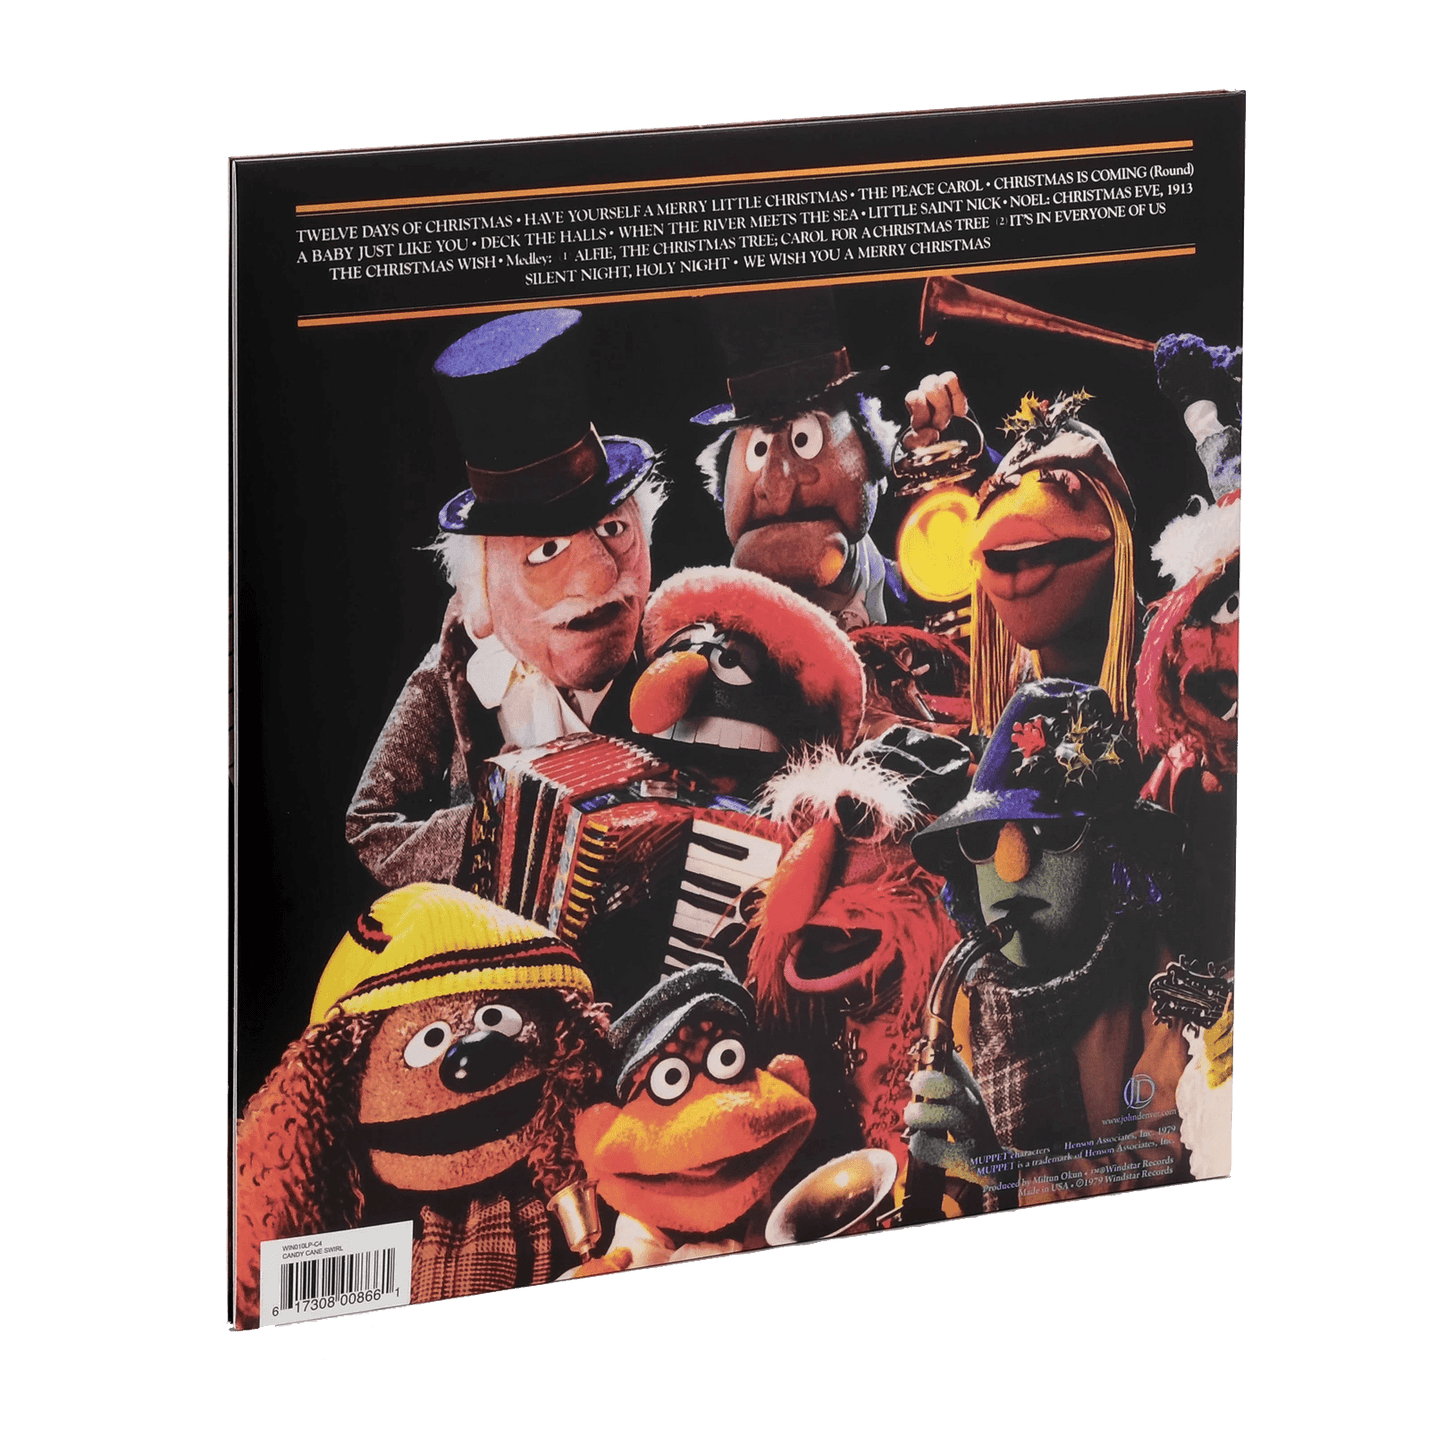 John Denver & The Muppets - A Christmas Together (Limited Edition, Indie Exclusive, Candy Cane Swirl Vinyl) (LP) - Joco Records